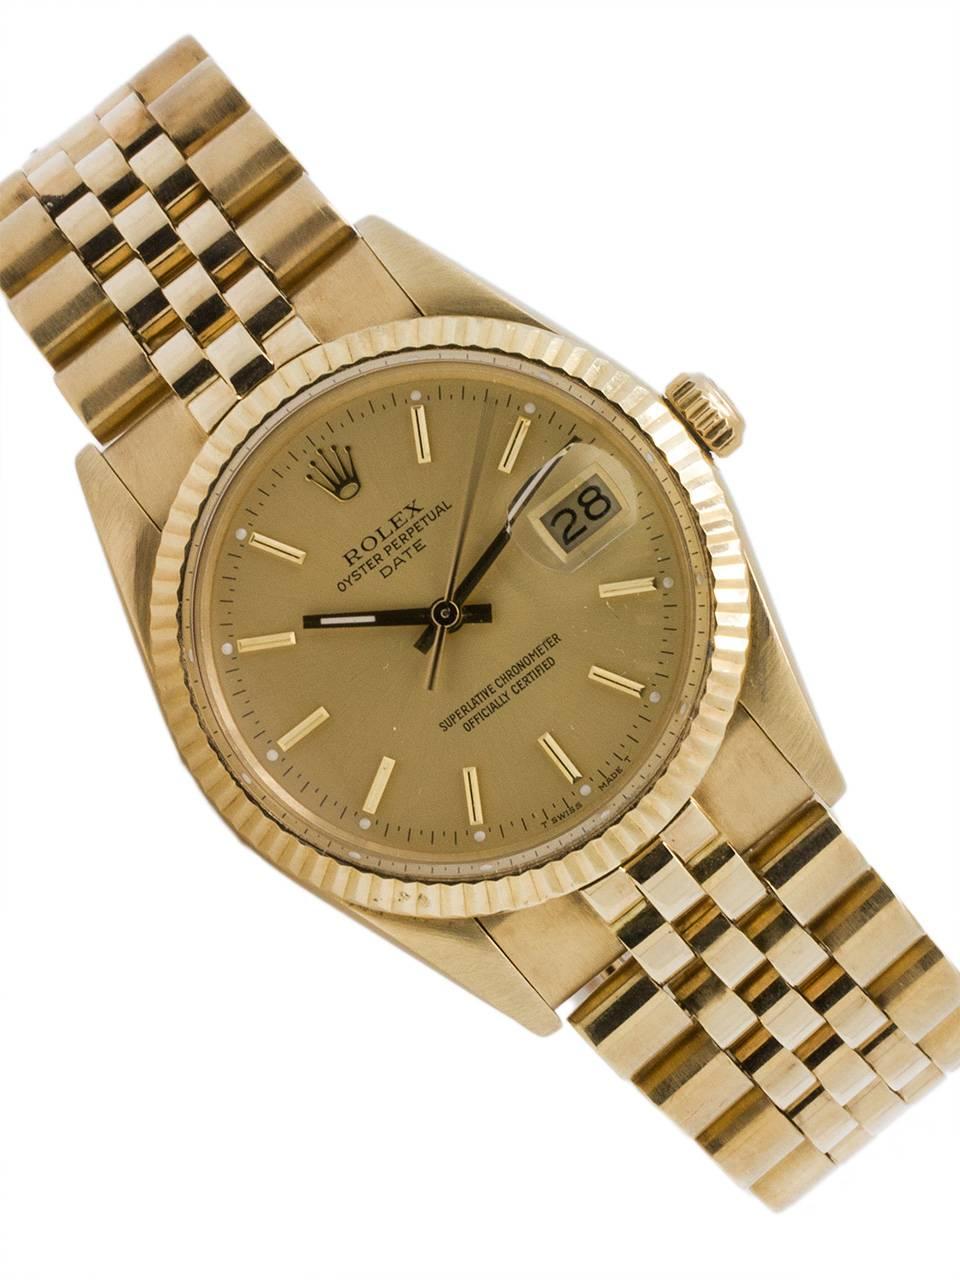 
Rolex Oyster Perpetual Date ref 15037 serial # 9.8 million circa 1986. Featuring 34mm diameter case with fluted bezel, acrylic crystal, and original champagne dial with applied gold indexes and gilt baton hands. Powered by caliber 3035 self winding